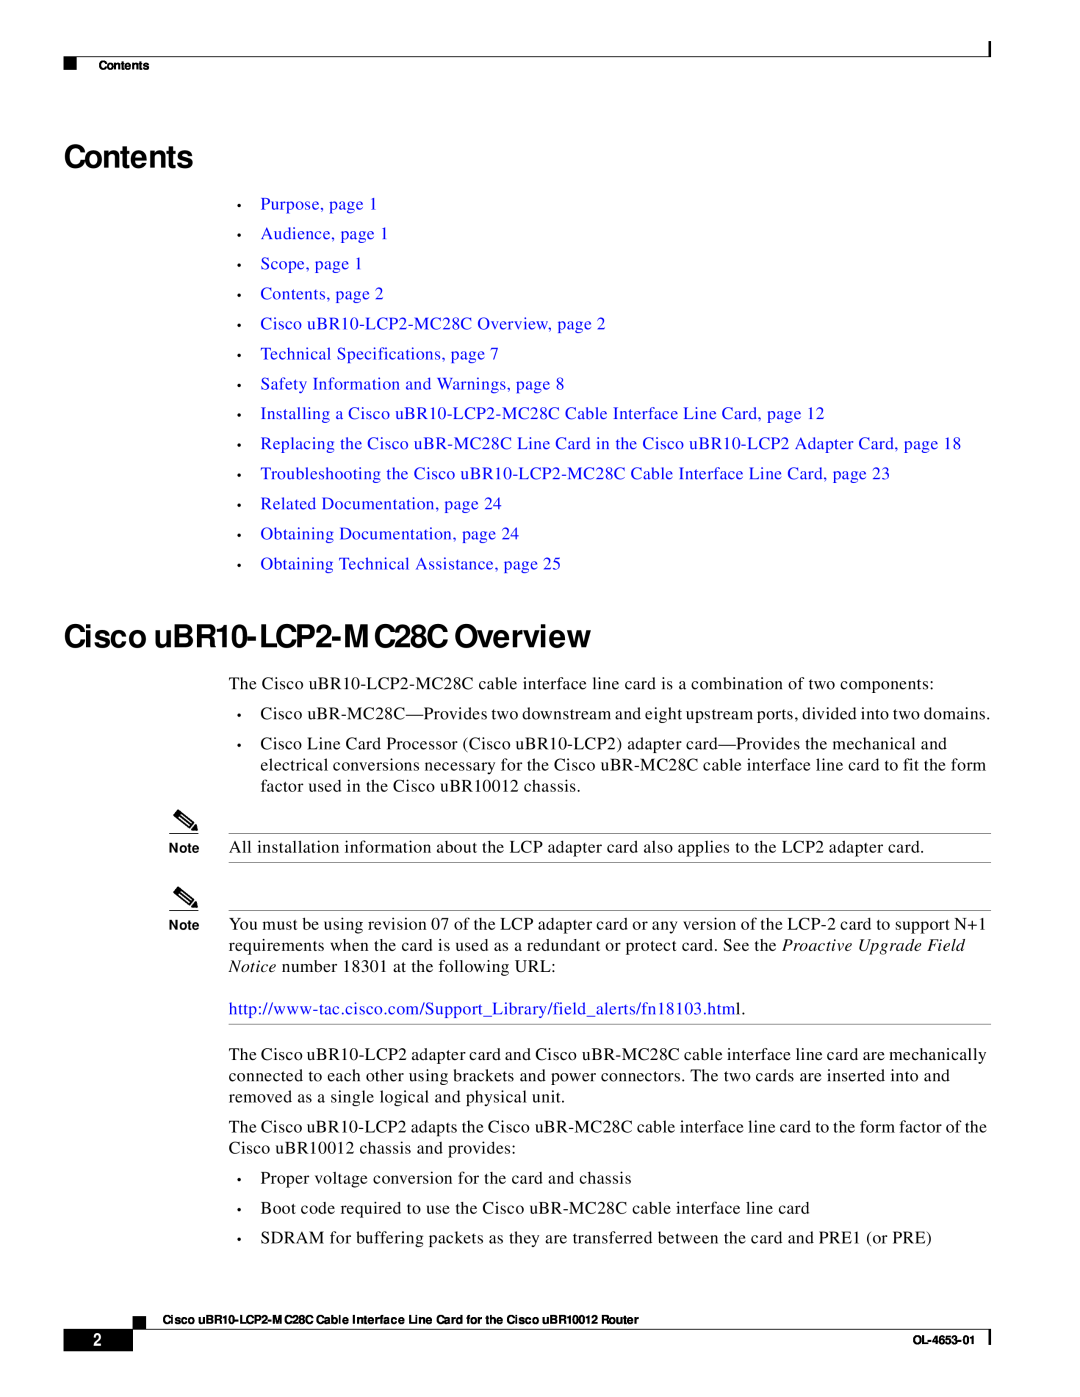 Cisco Systems manual Cisco uBR10-LCP2-MC28C Overview, Purpose, page Audience, page Scope, page Contents, page 